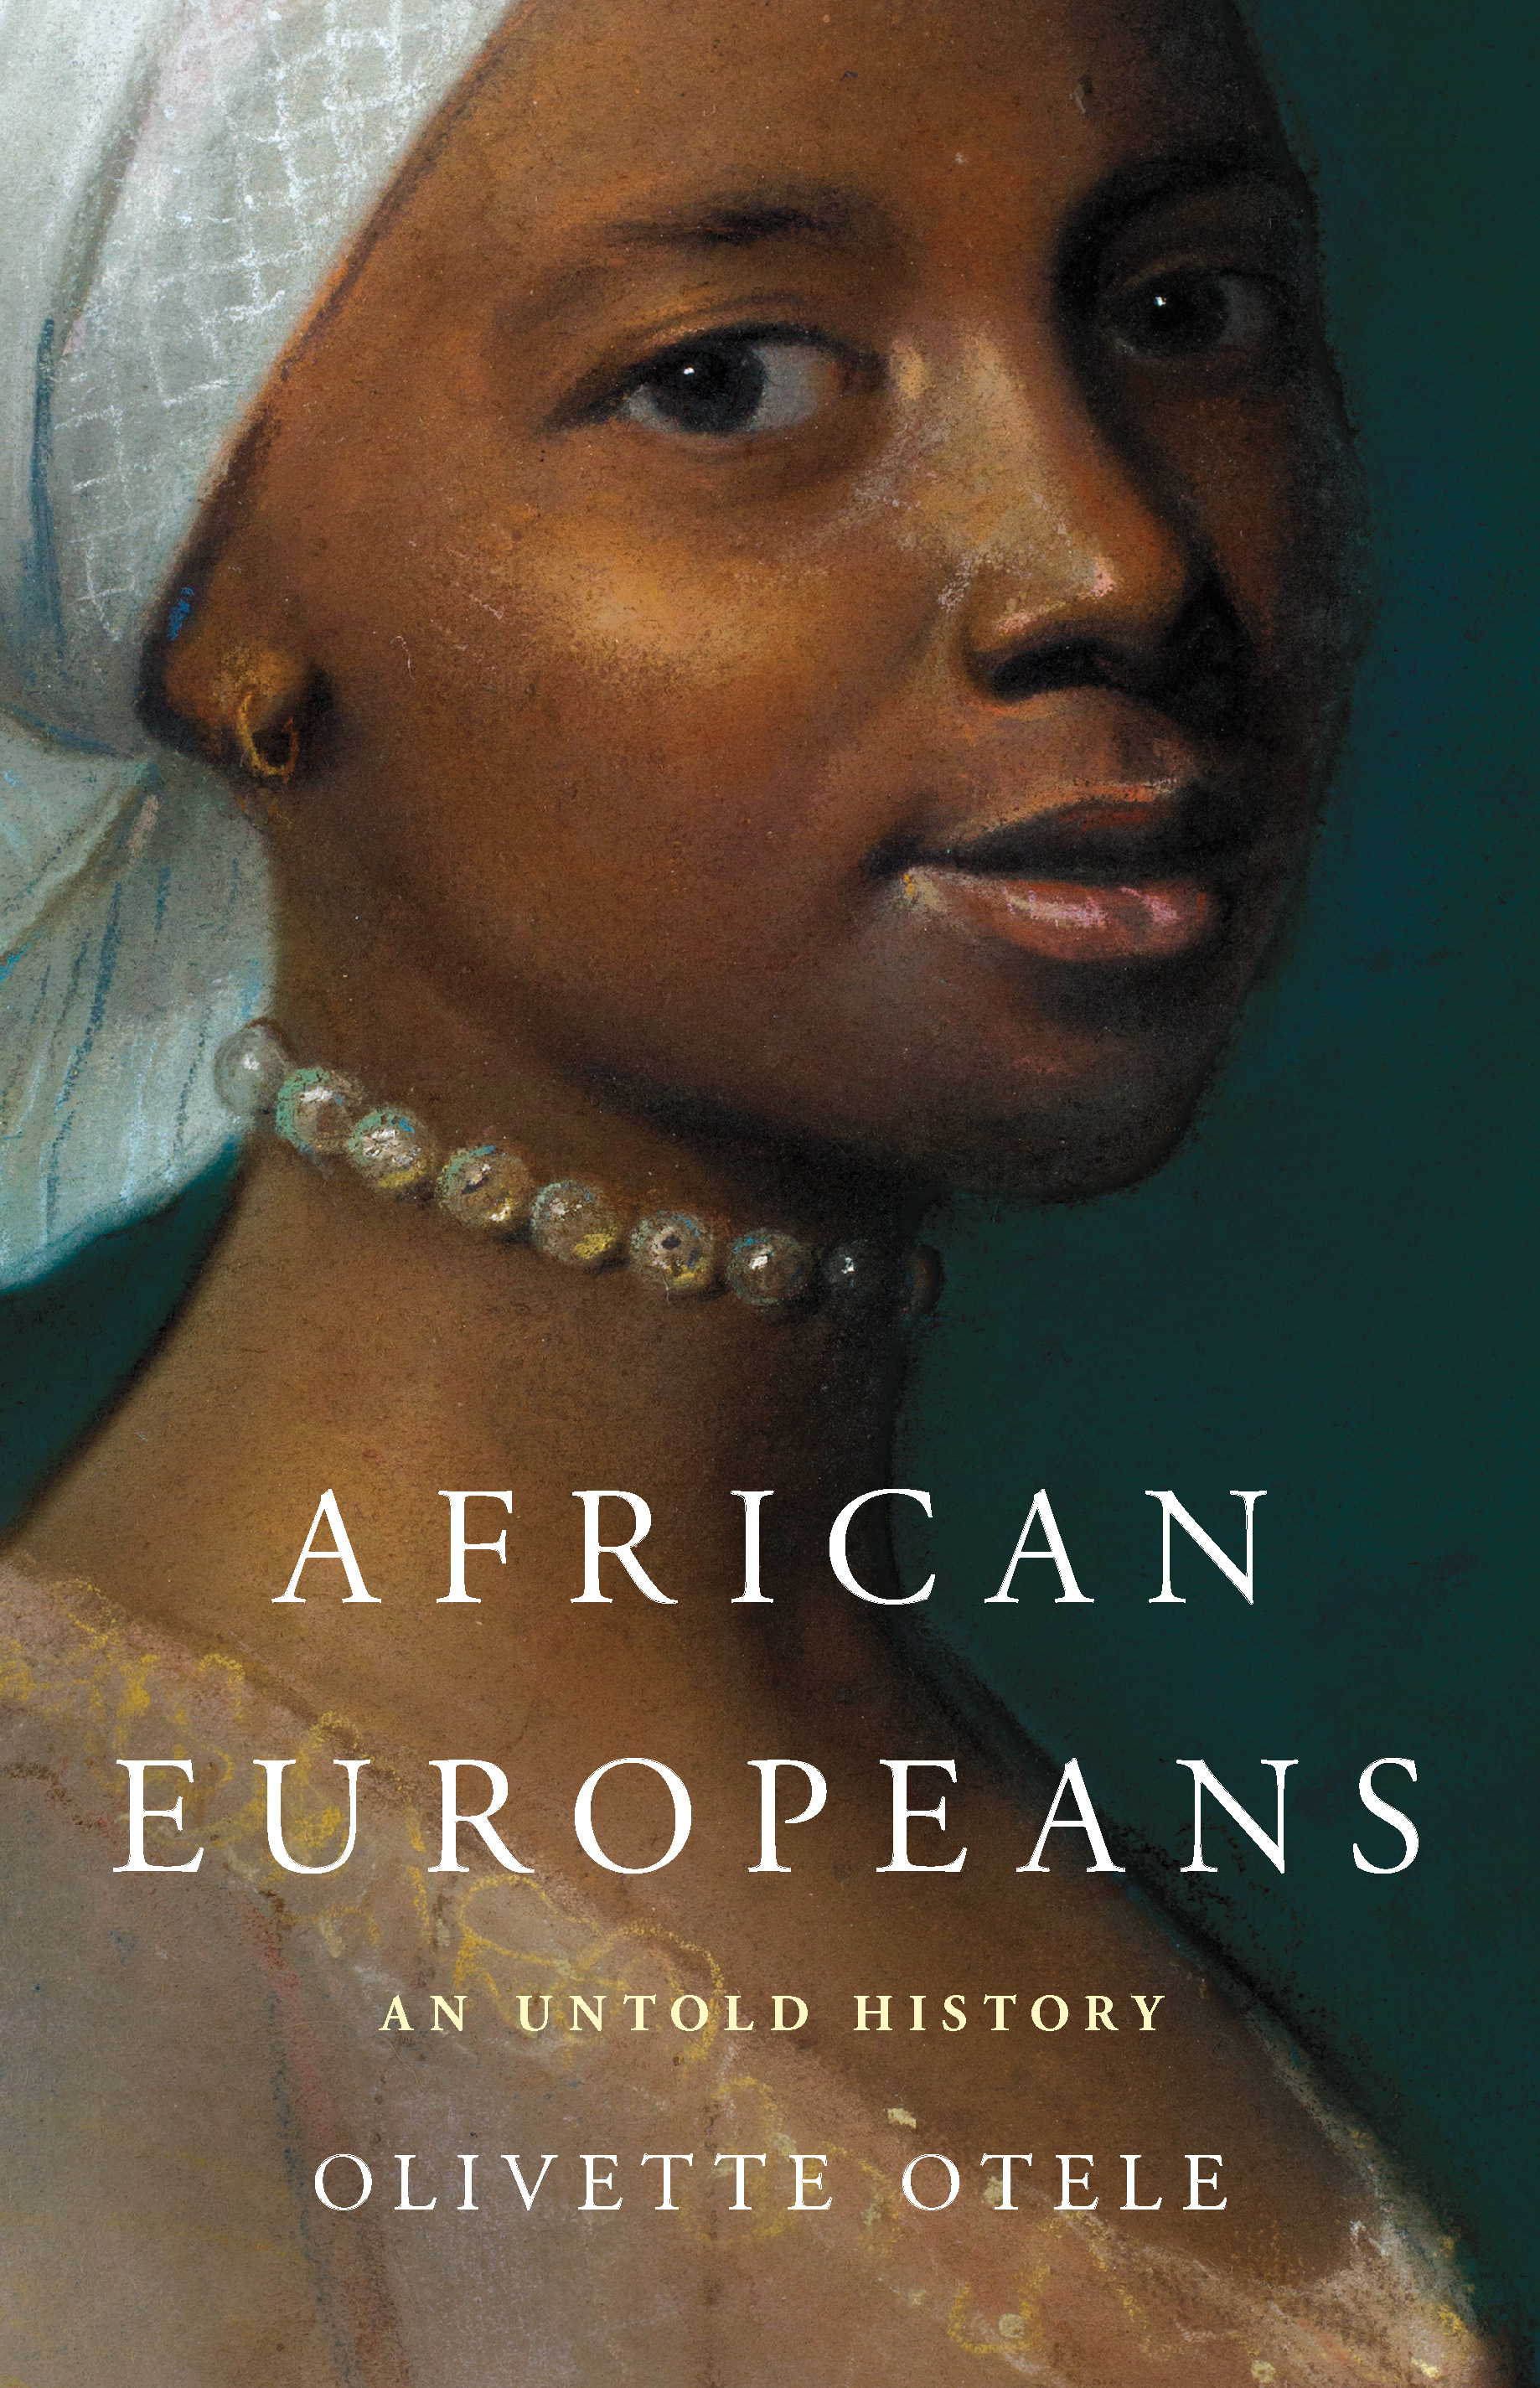 African Europeans: An Untold History, by Olivette Otele